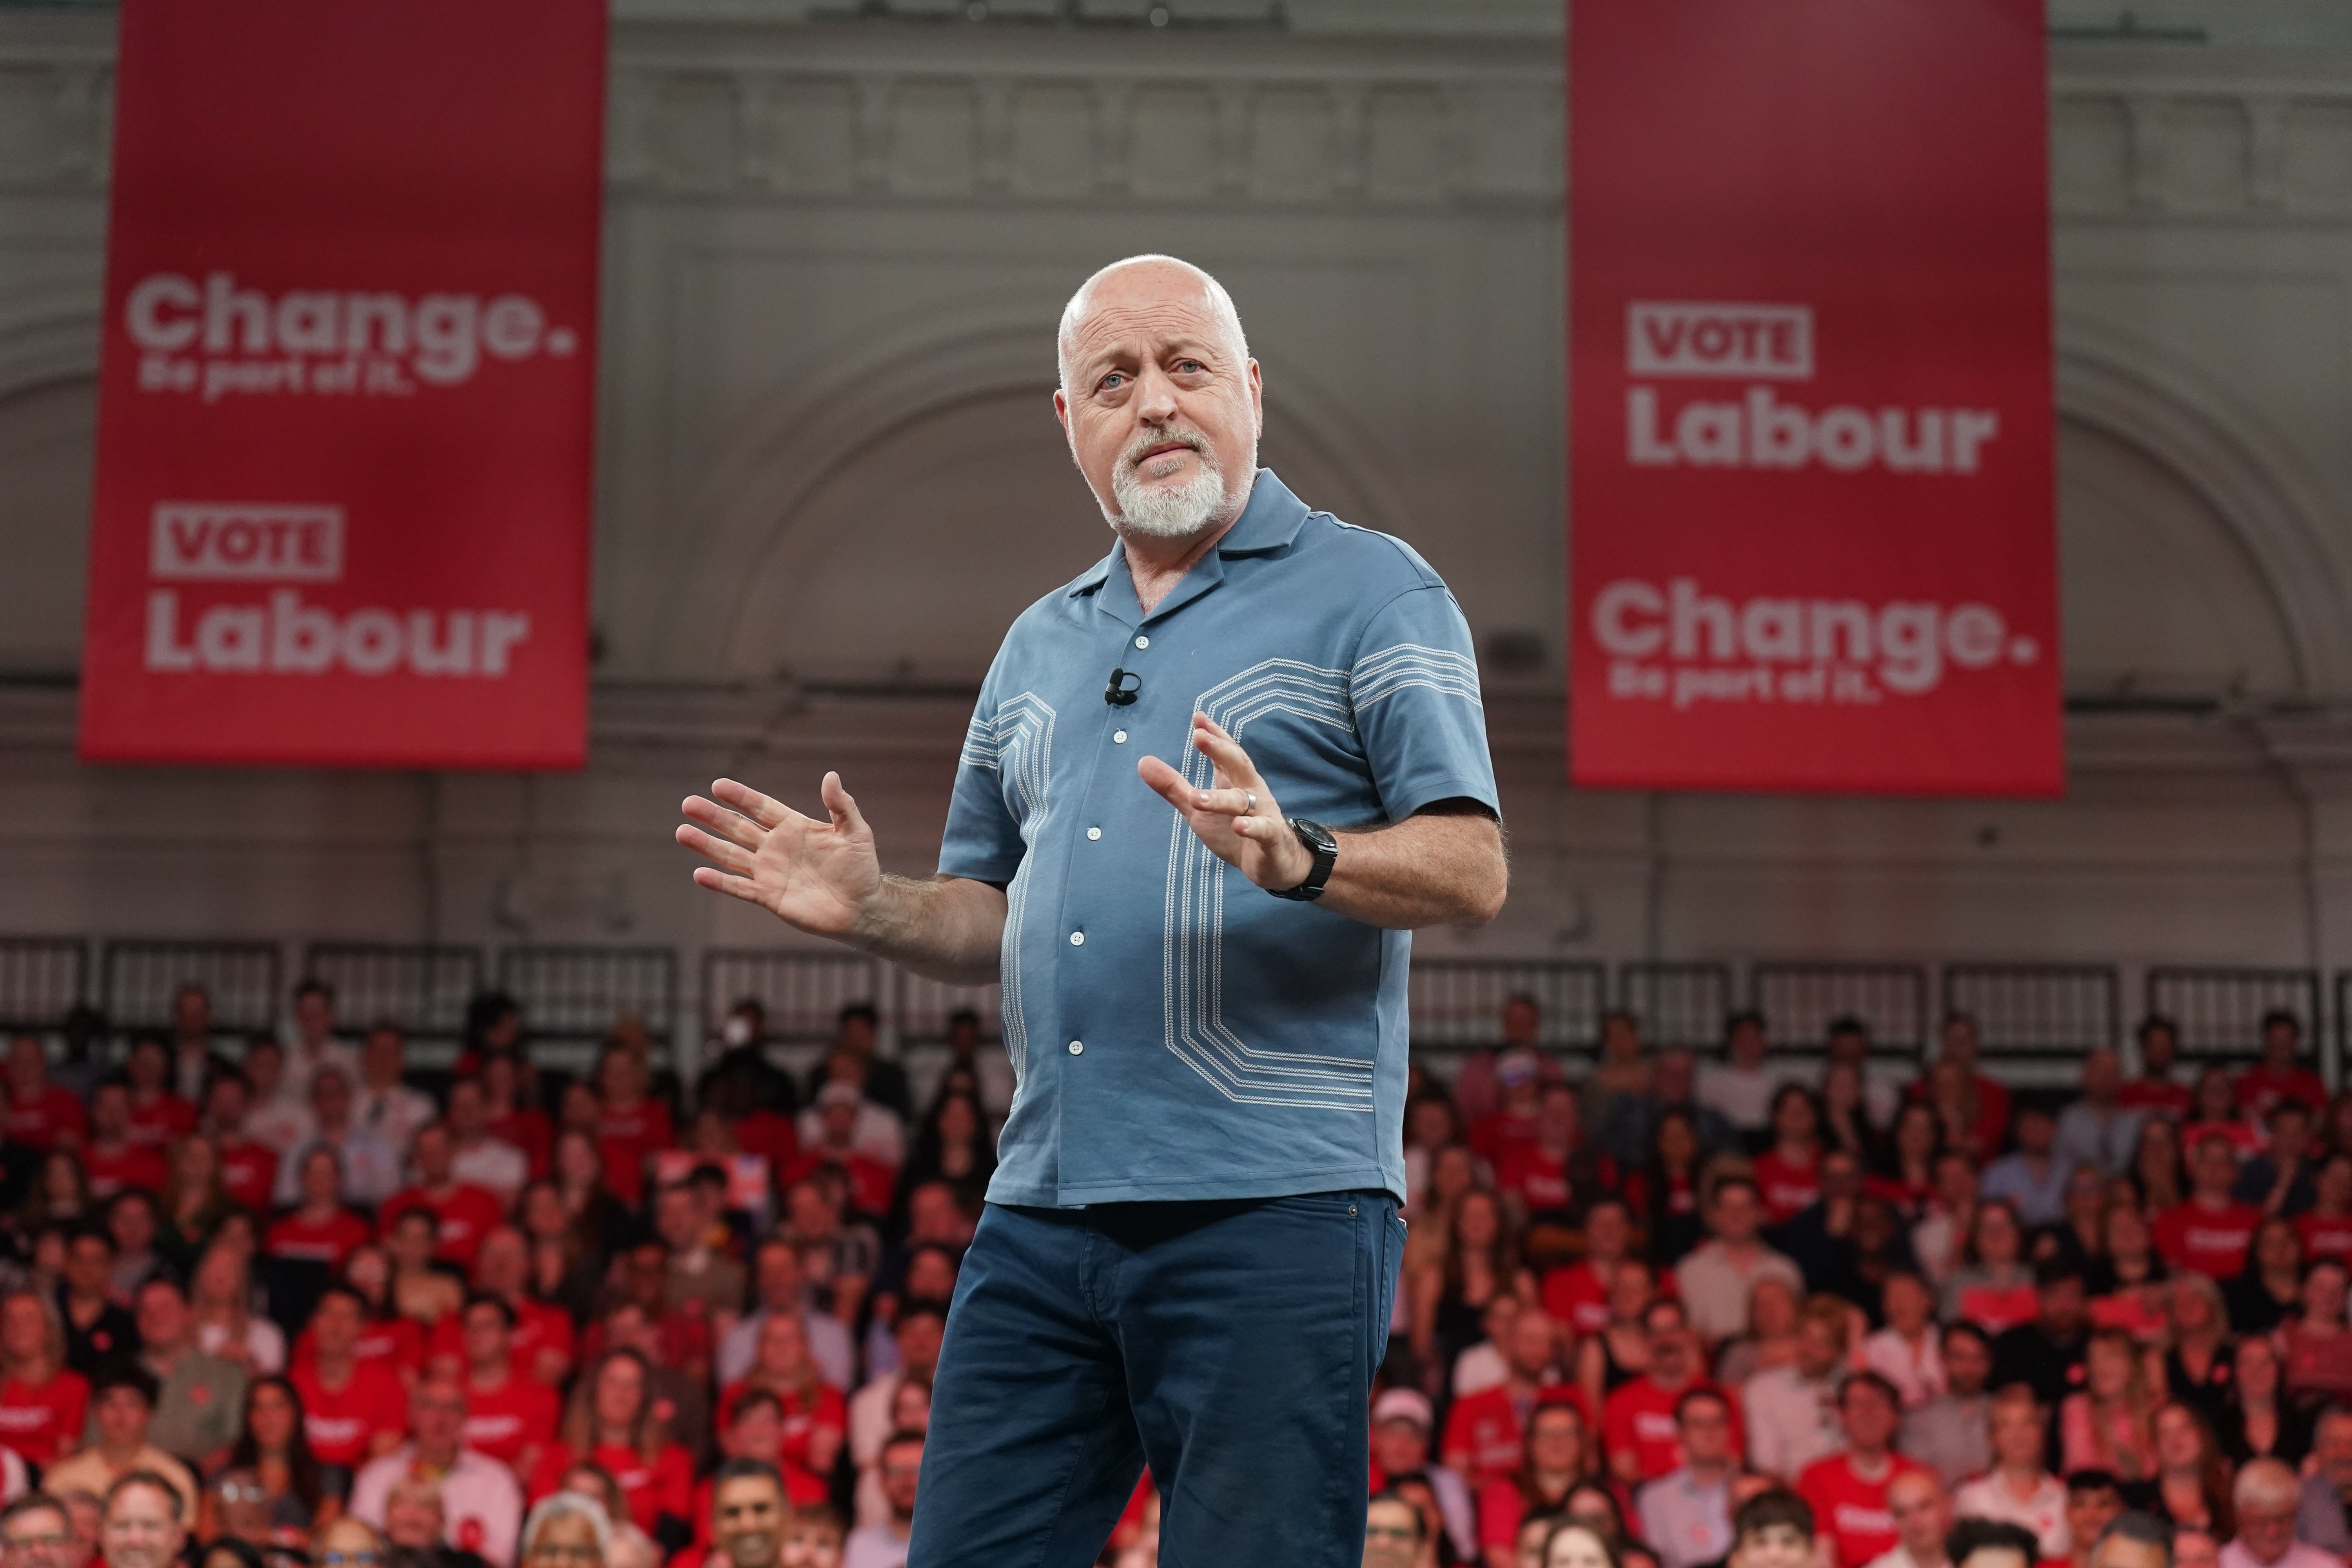 Musician and comedian Bill Bailey addressed the Labour rally, while there were video endorsements from celebrities including Sir Elton John (Stefan Rousseau/PA)